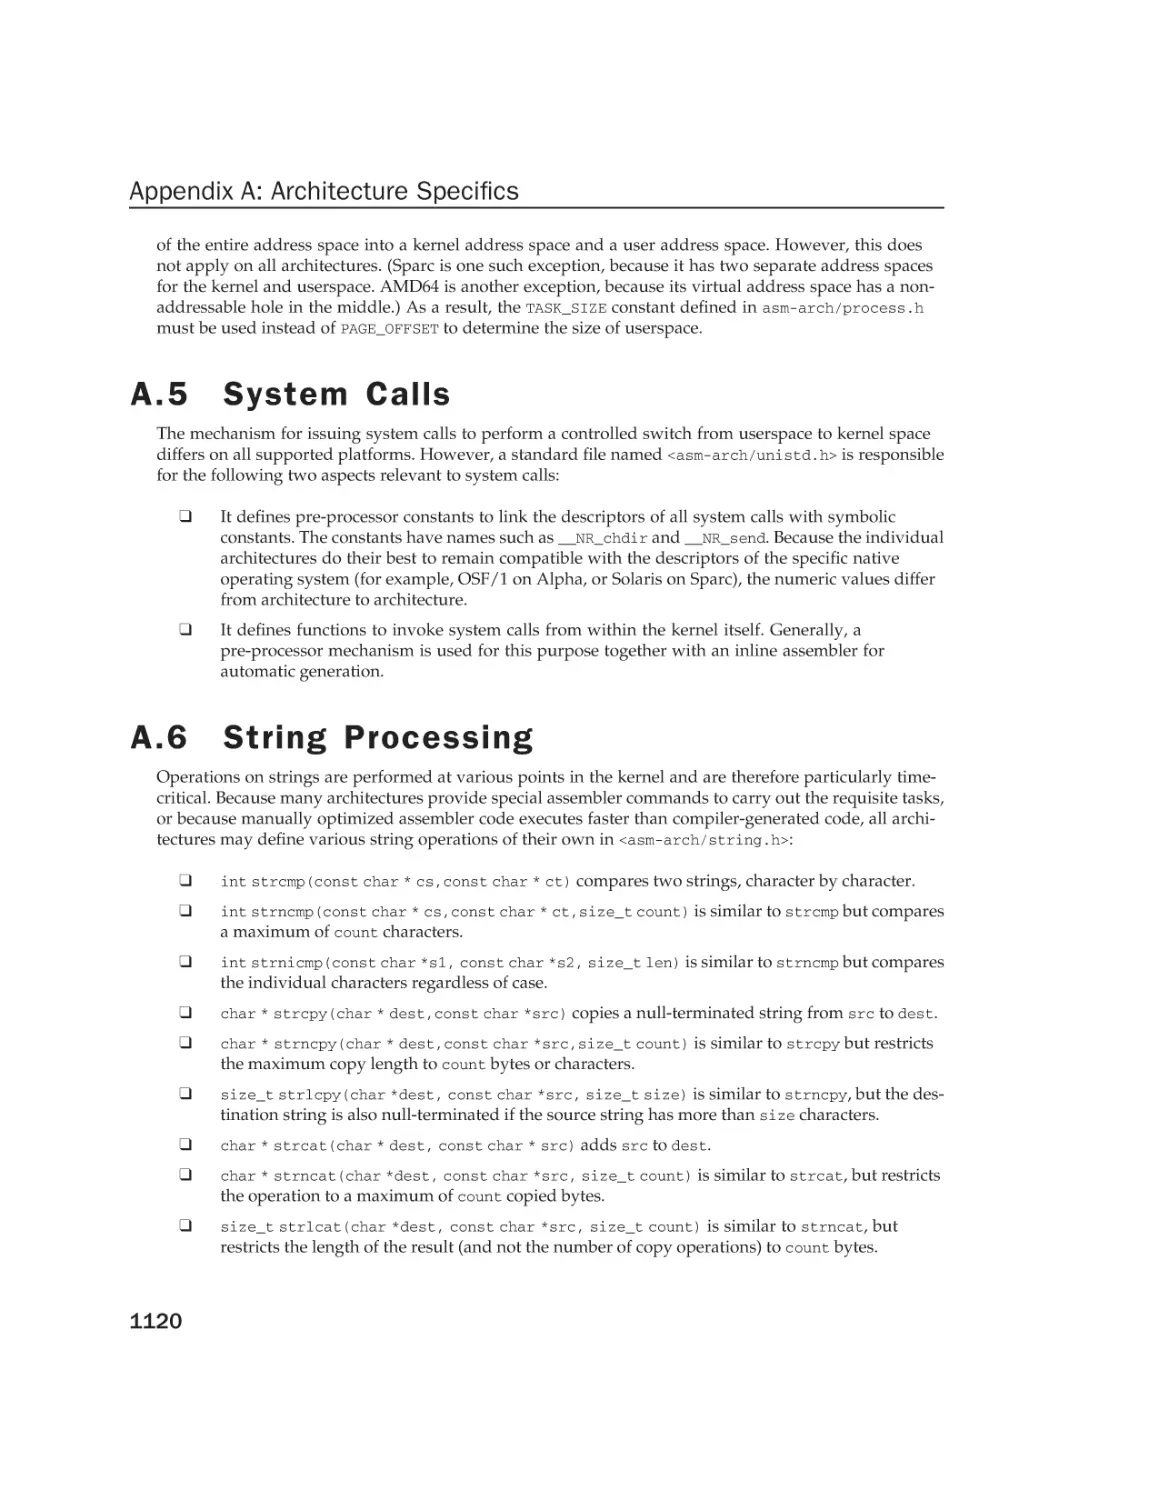 A.5 System Calls
A.6 String Processing